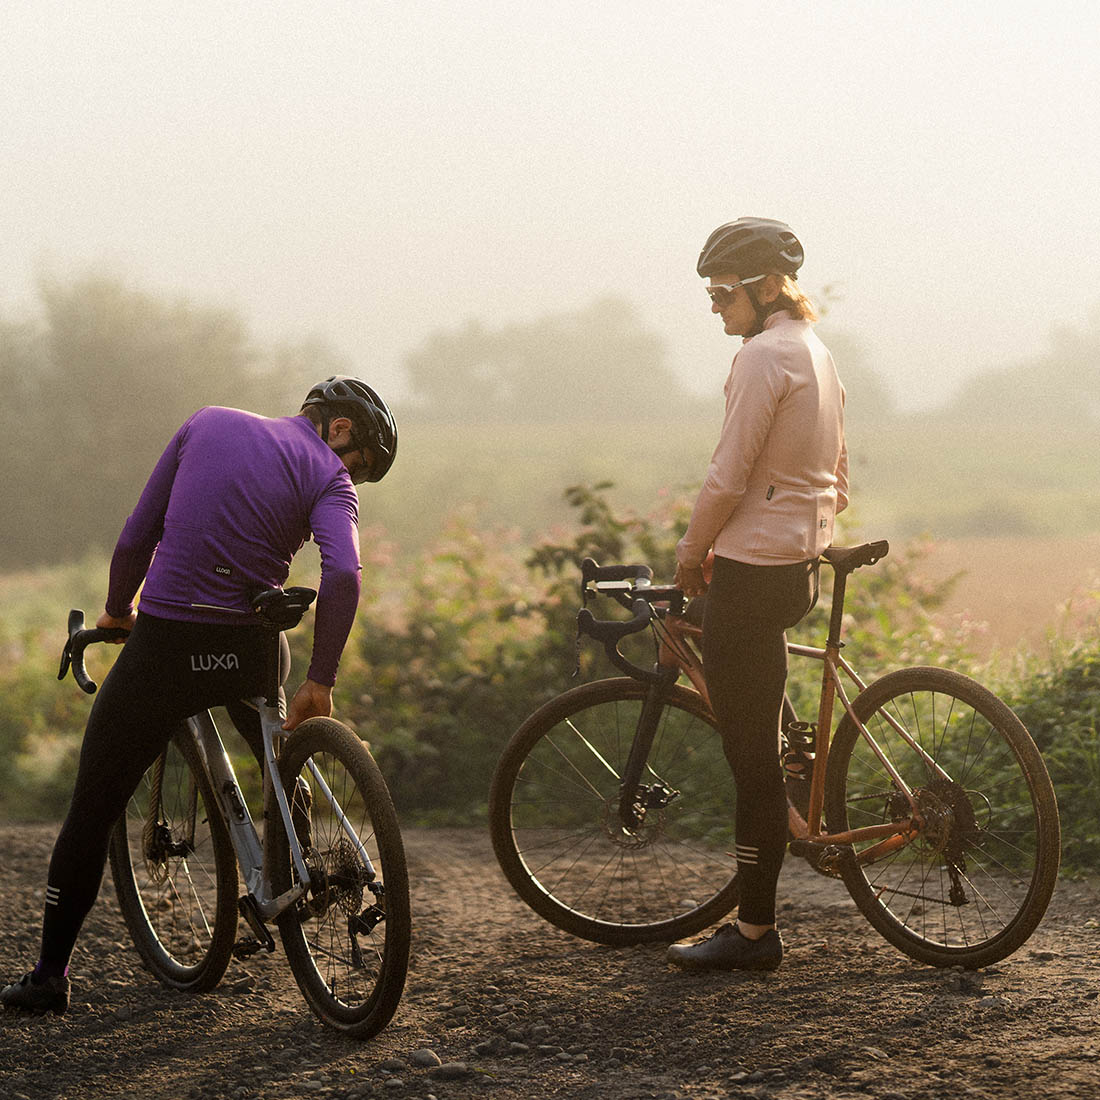  Autumn premium cycling apparel by the Polish manufacturer Luxa.